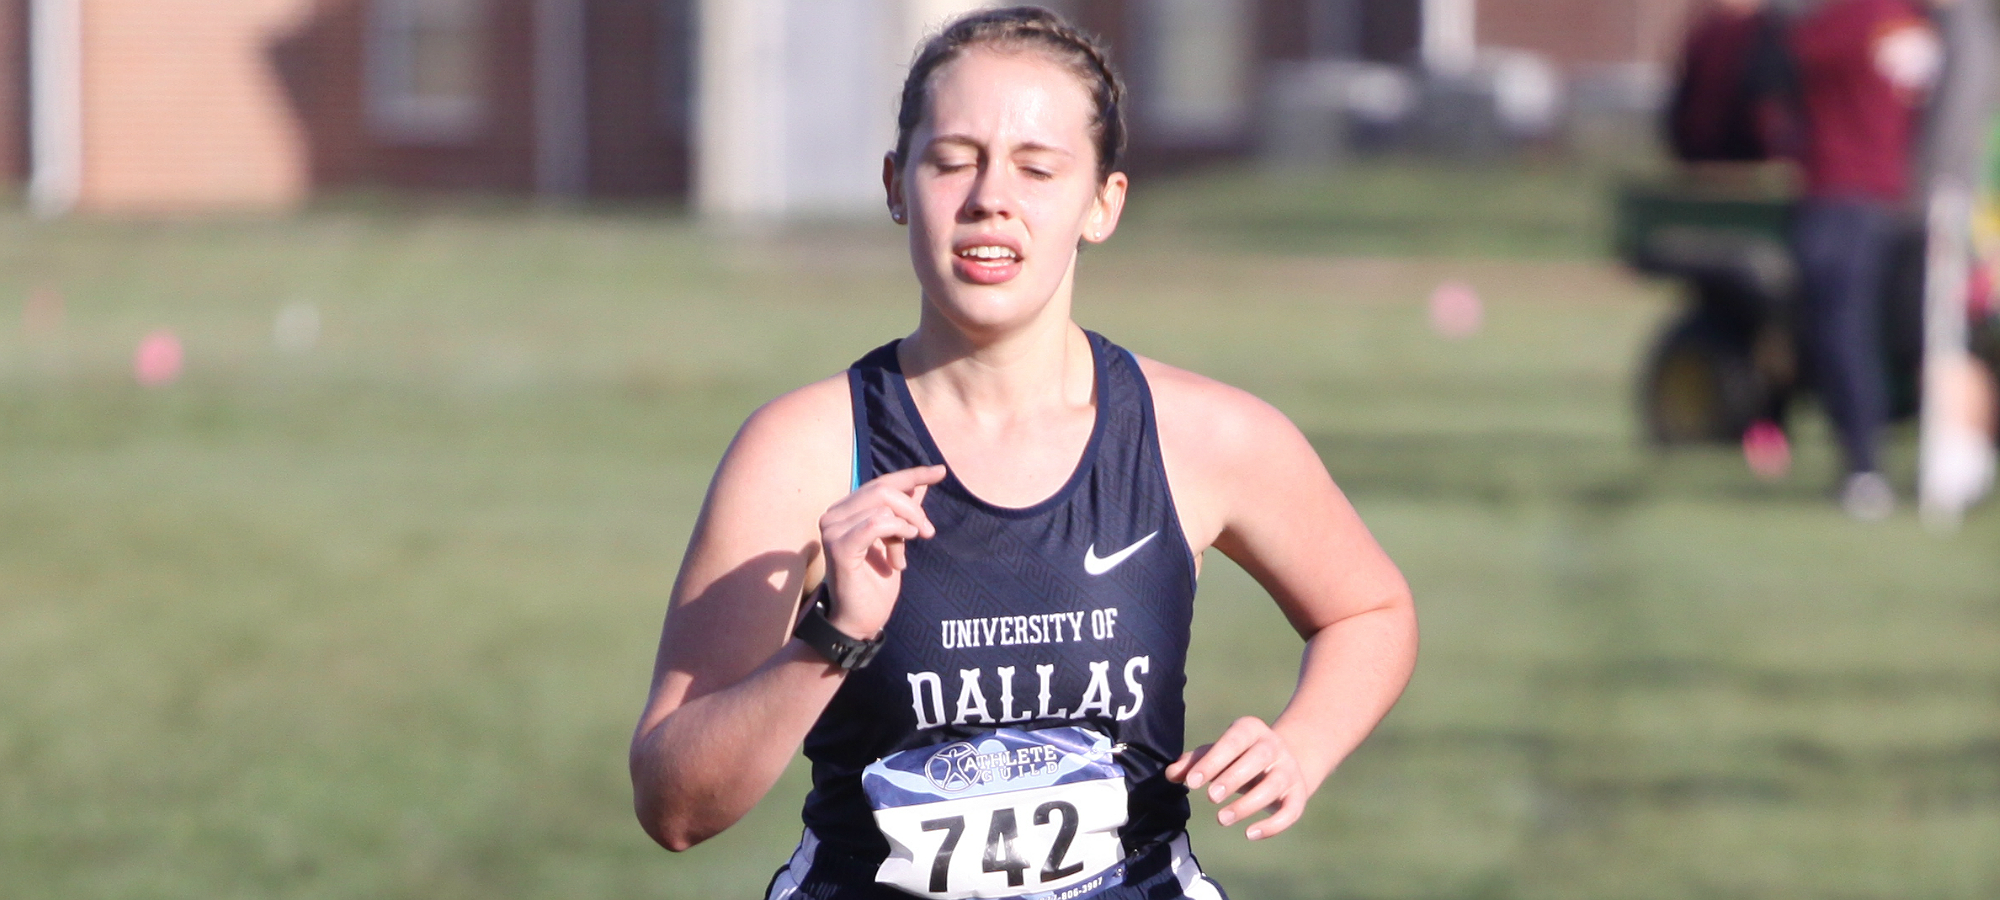 Women's Cross Country Earn 3rd at SCAC Championship